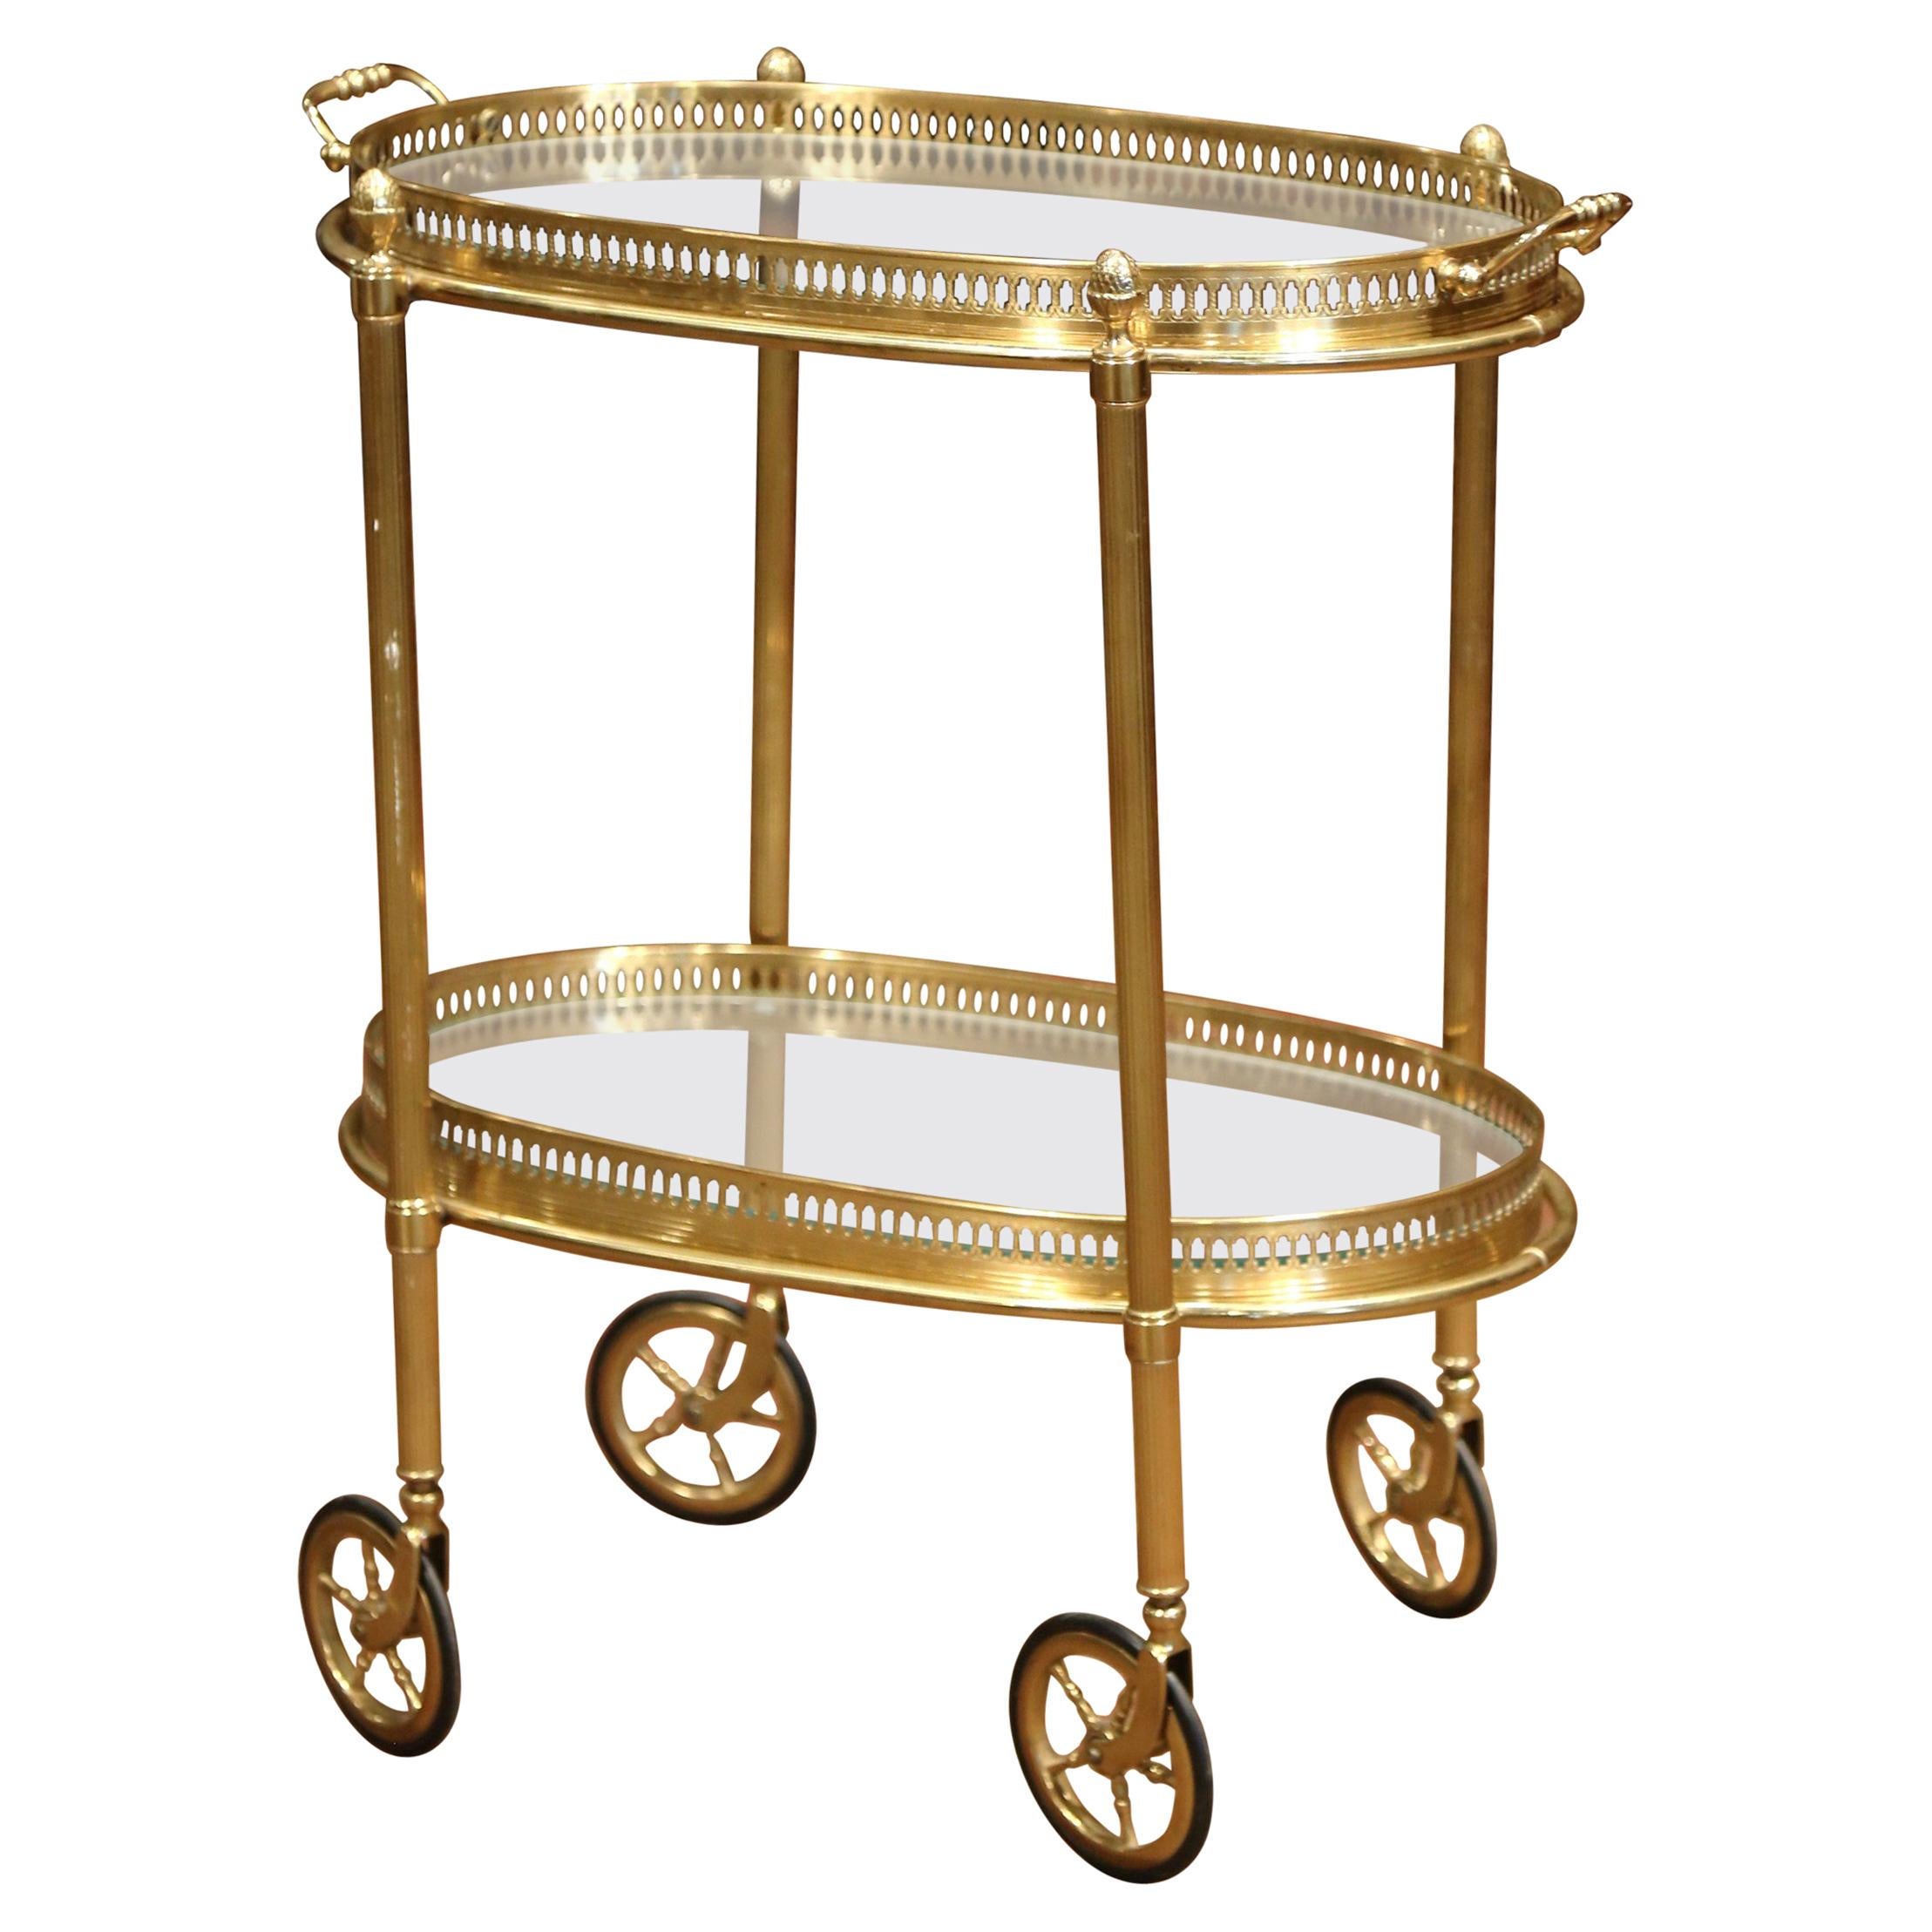 Early 20th Century, French Oval Brass Dessert Table or Bar Cart on Wheels